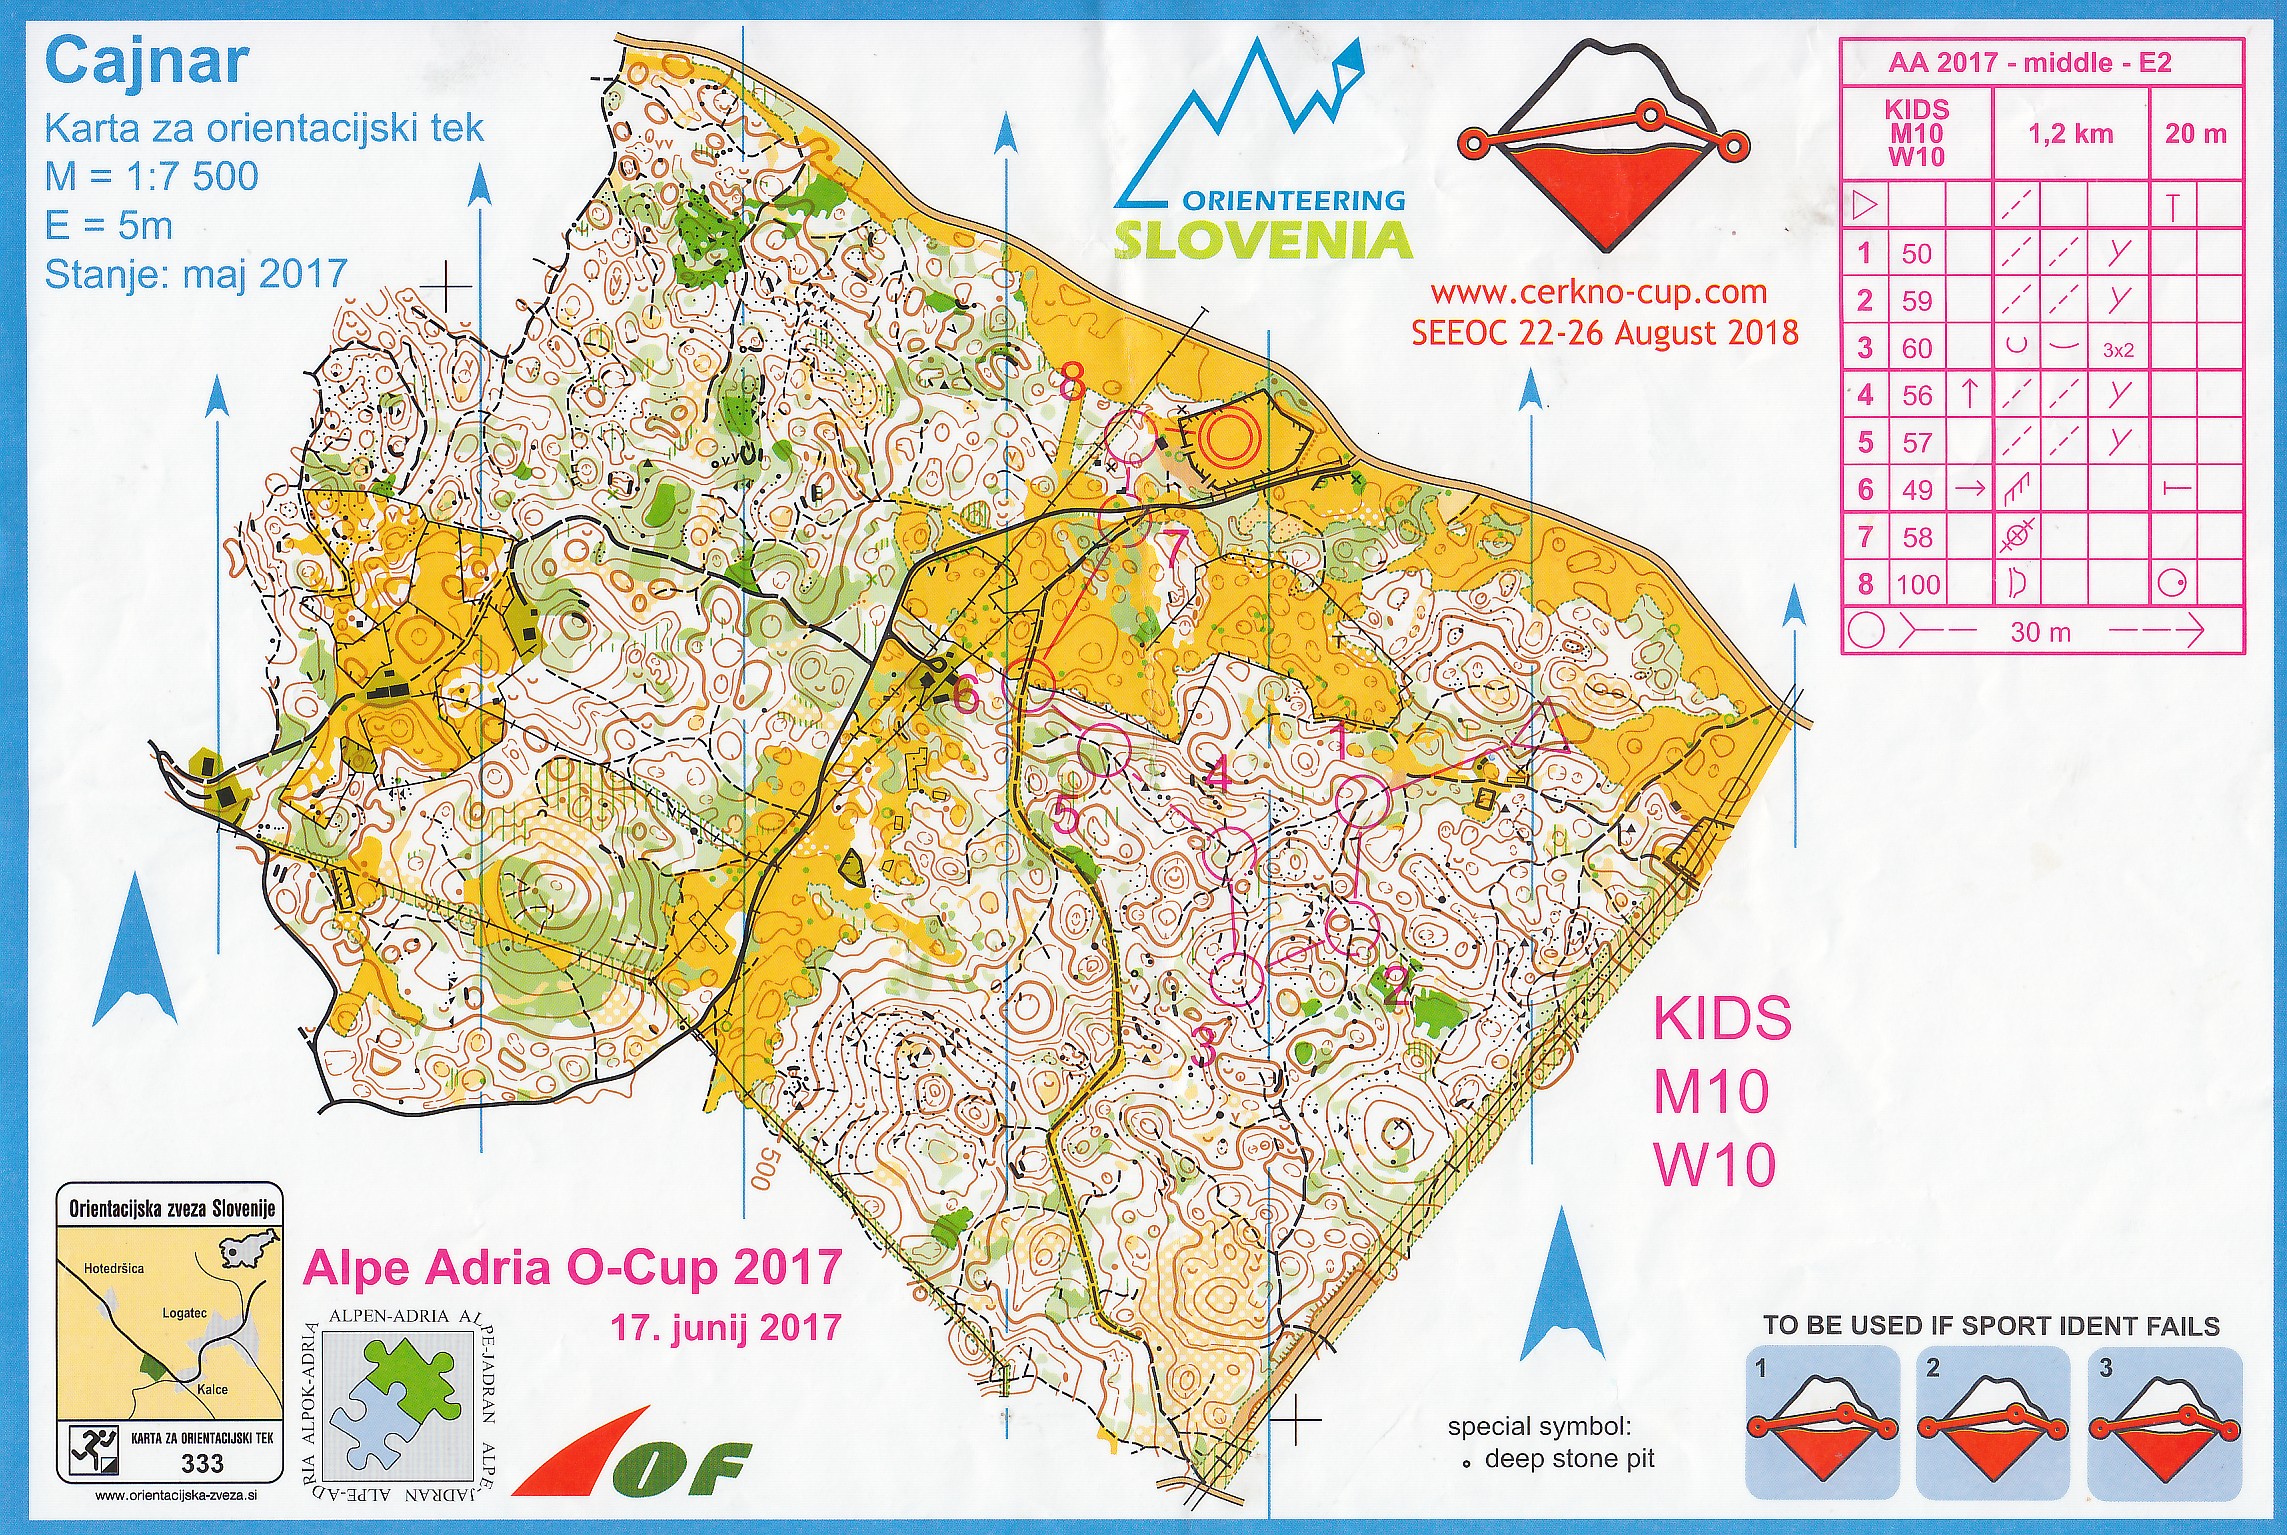 Alpe Adria Orienteering Cup 2017 - Middle (17.06.2017)